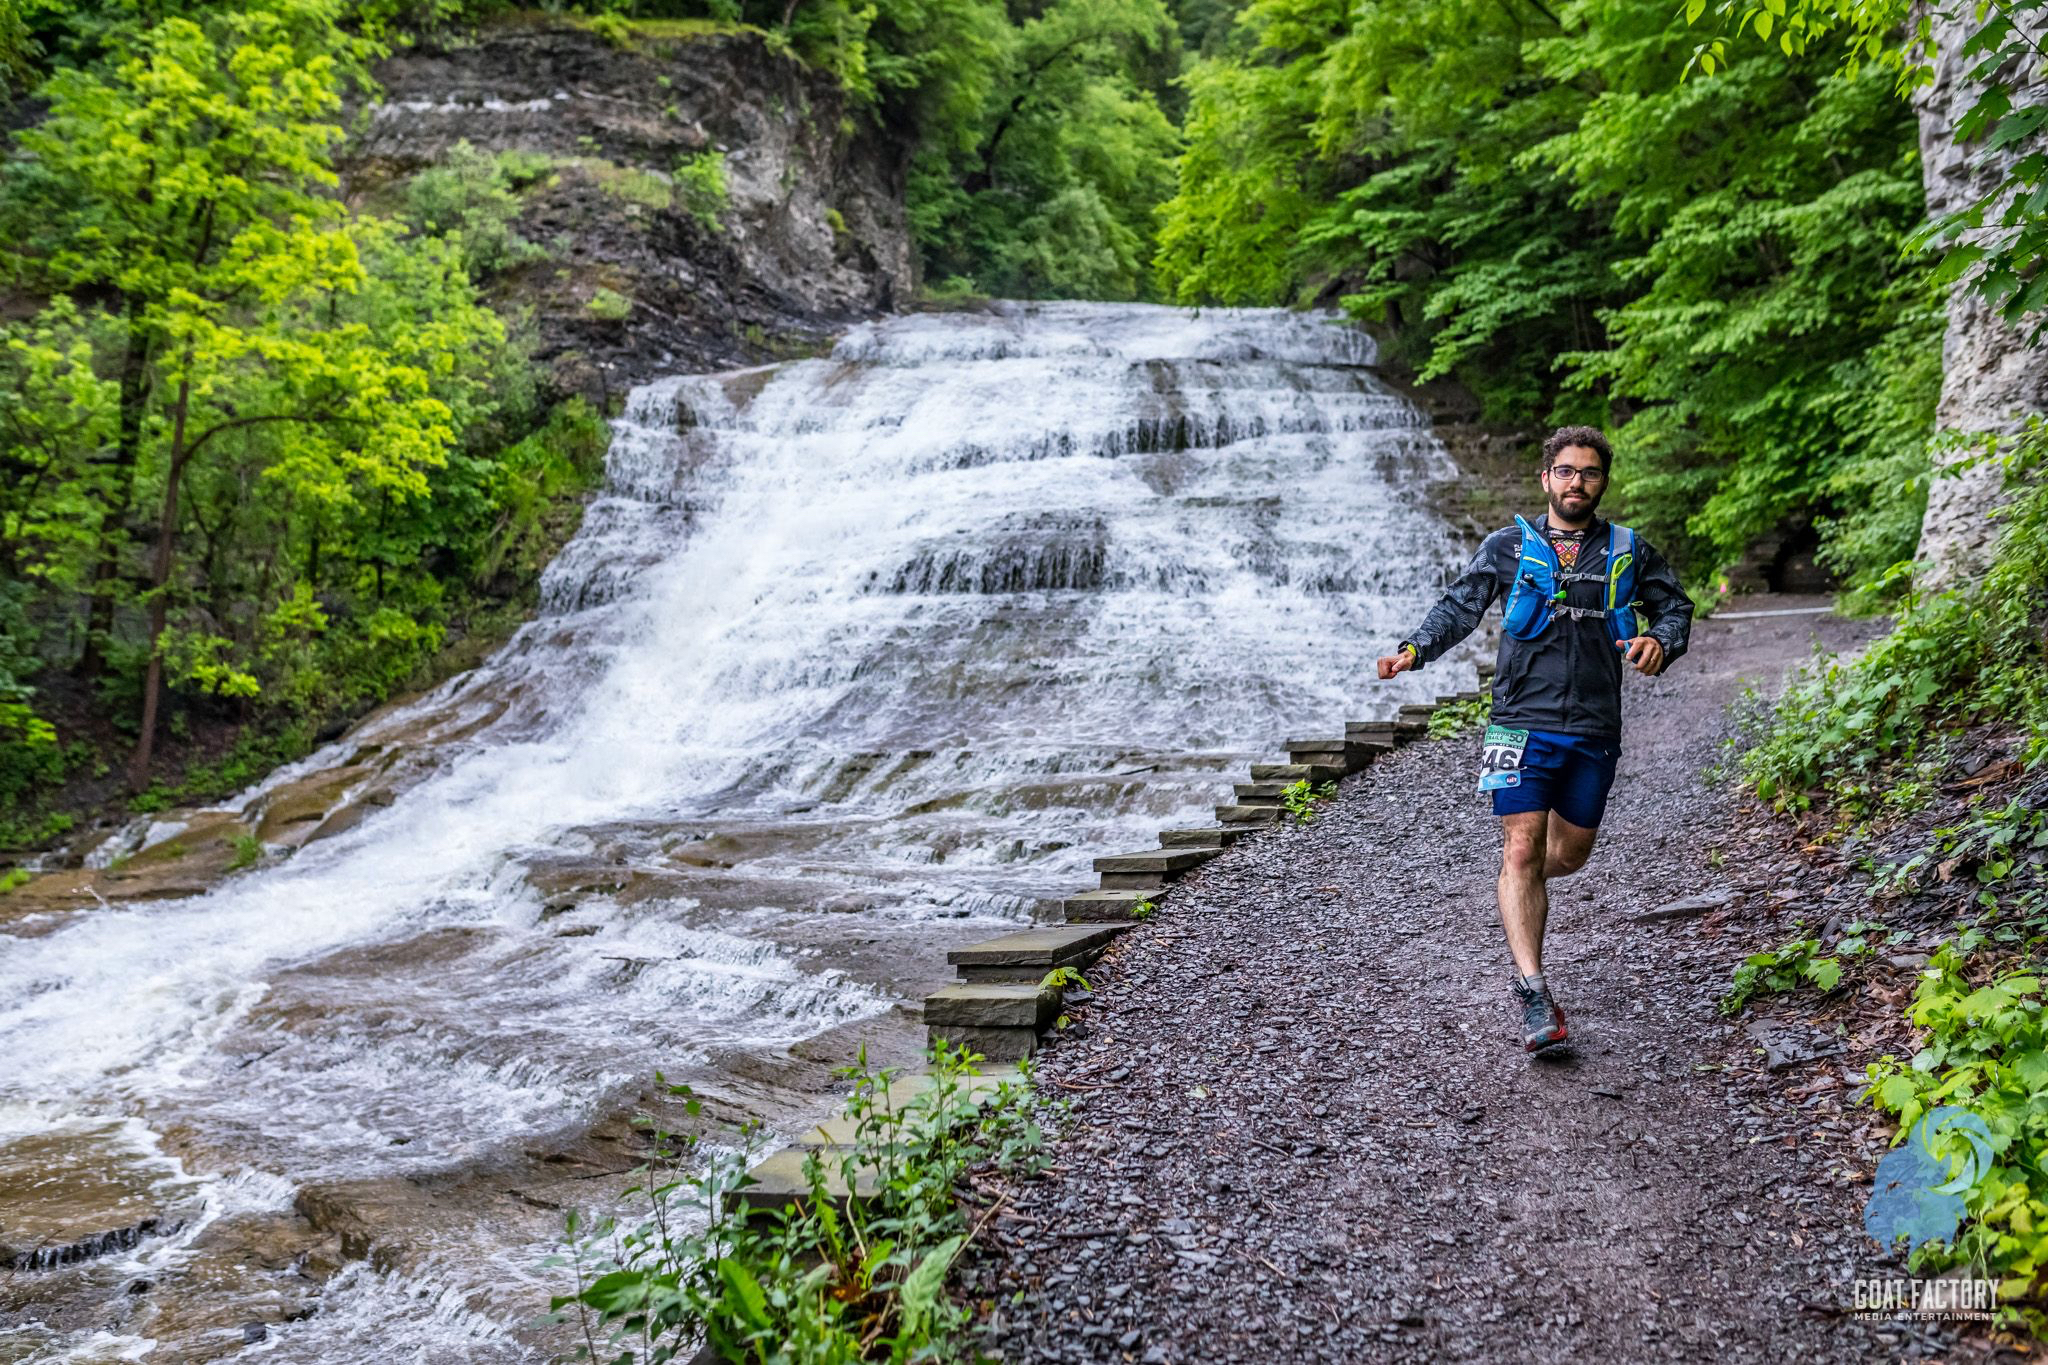 Me running down a gravel path with a waterfall to the left. I'm wearing a black windbreaker, a blue hydration pack, shorts, and a race bib. I have a relaxed yet focused look on my face.